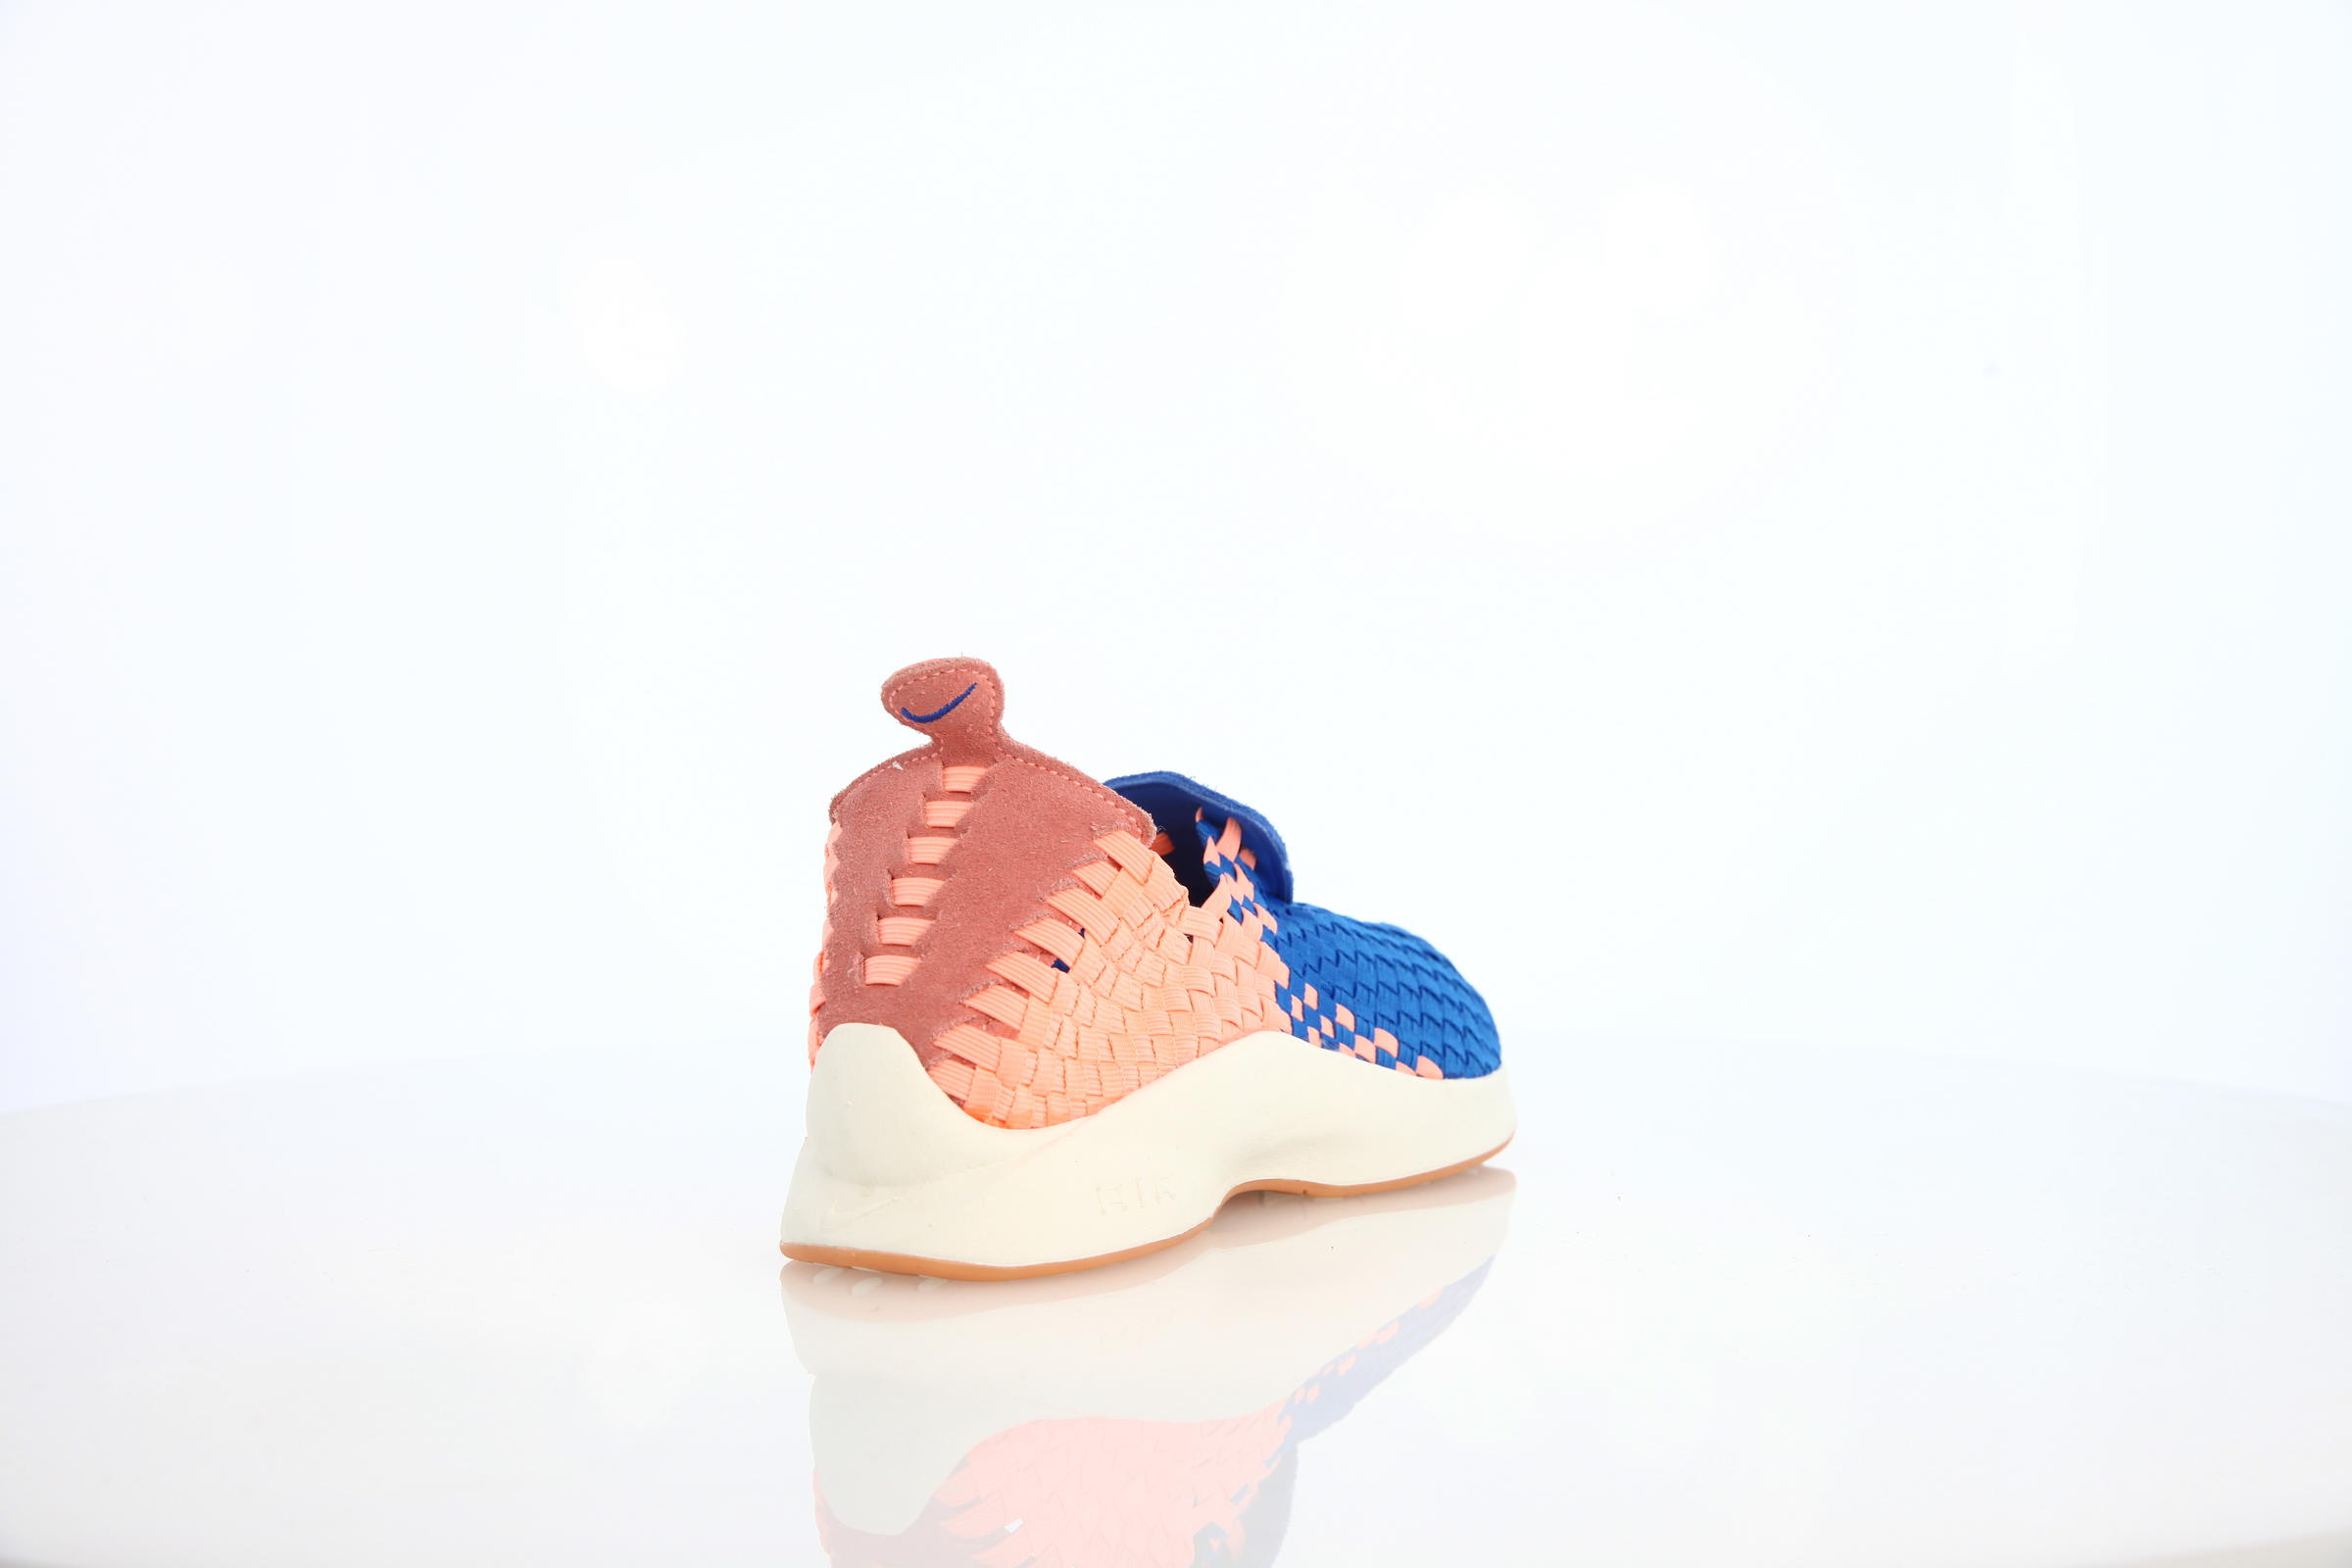 Nike Wmns Air Woven "Sunset Glow"